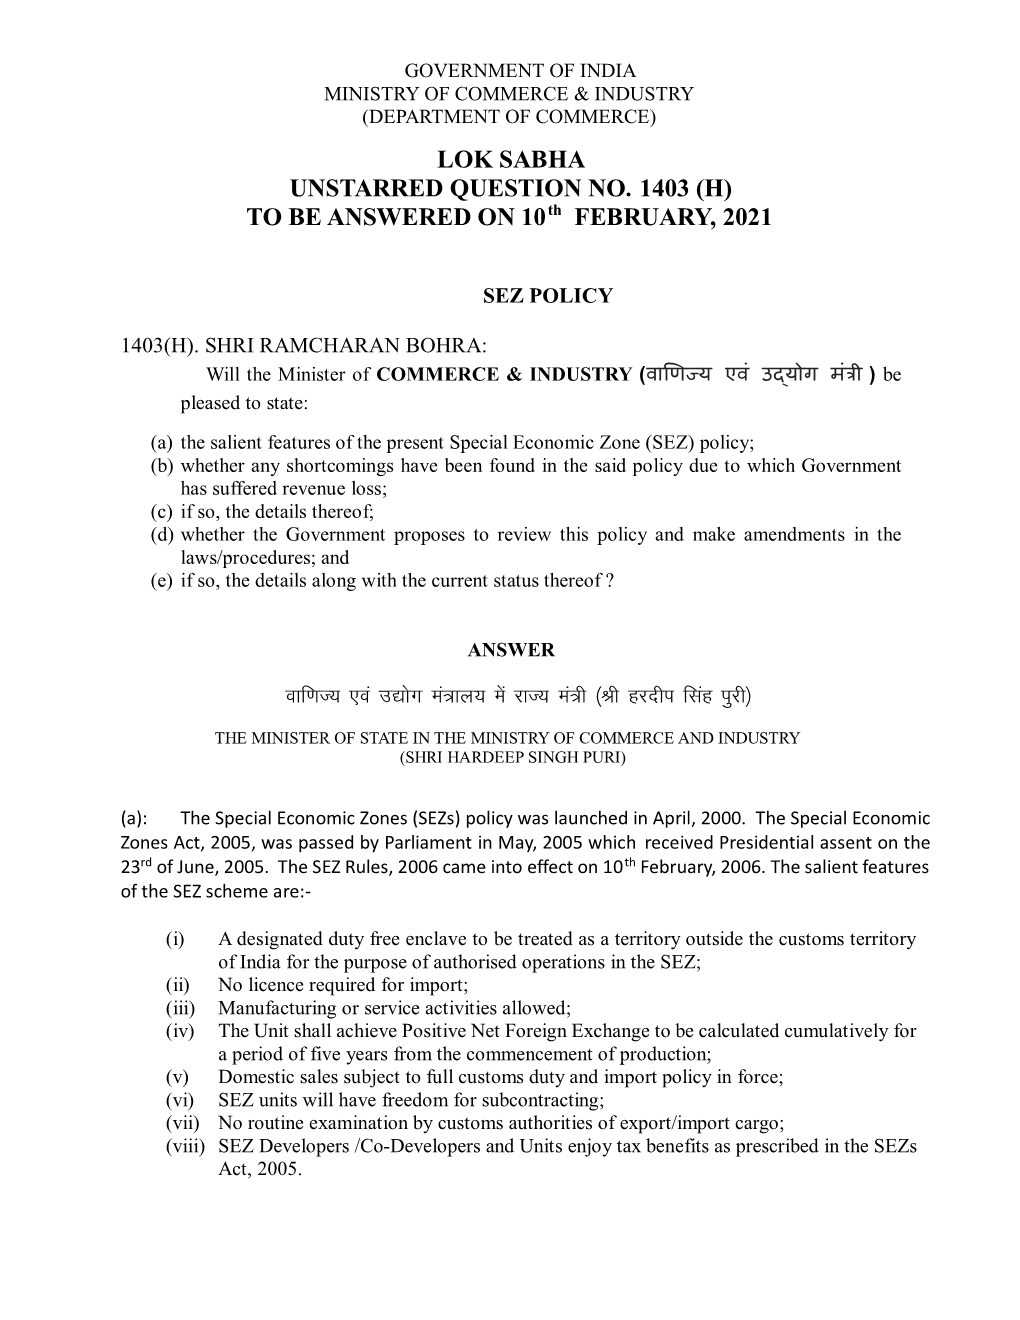 LOK SABHA UNSTARRED QUESTION NO. 1403 (H) to BE ANSWERED on 10Th FEBRUARY, 2021